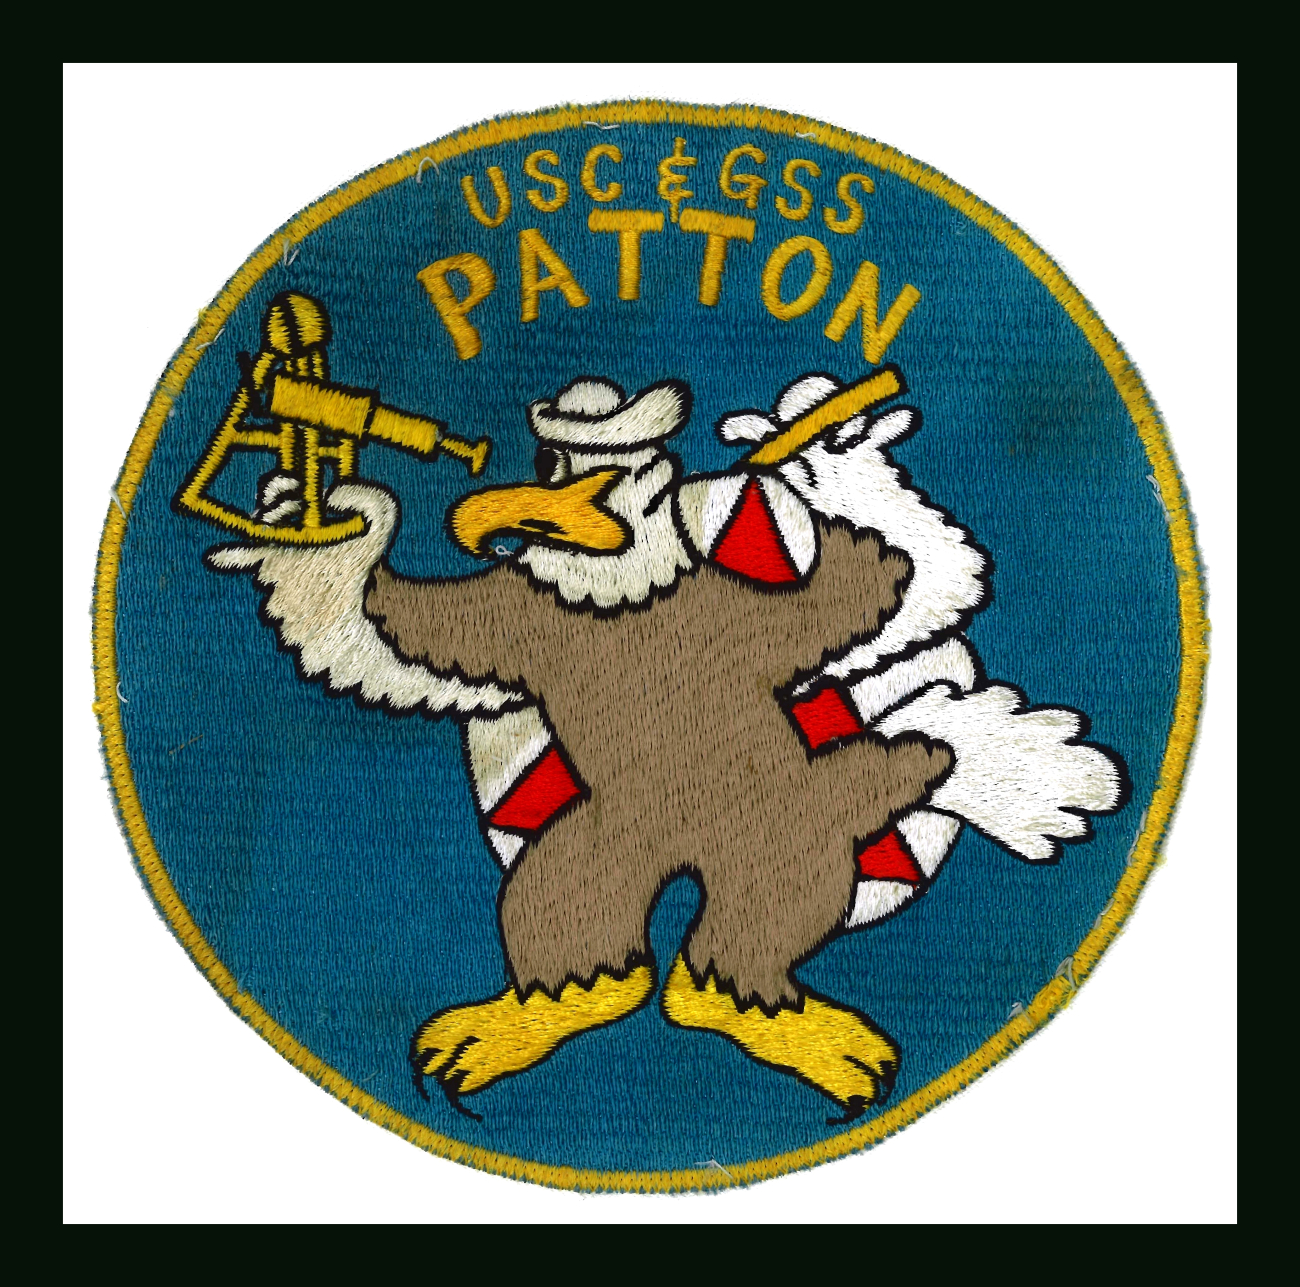 Patch commmemorating Coast and Geodetic Survey Ship PATTON featuringthe Disney Eagle